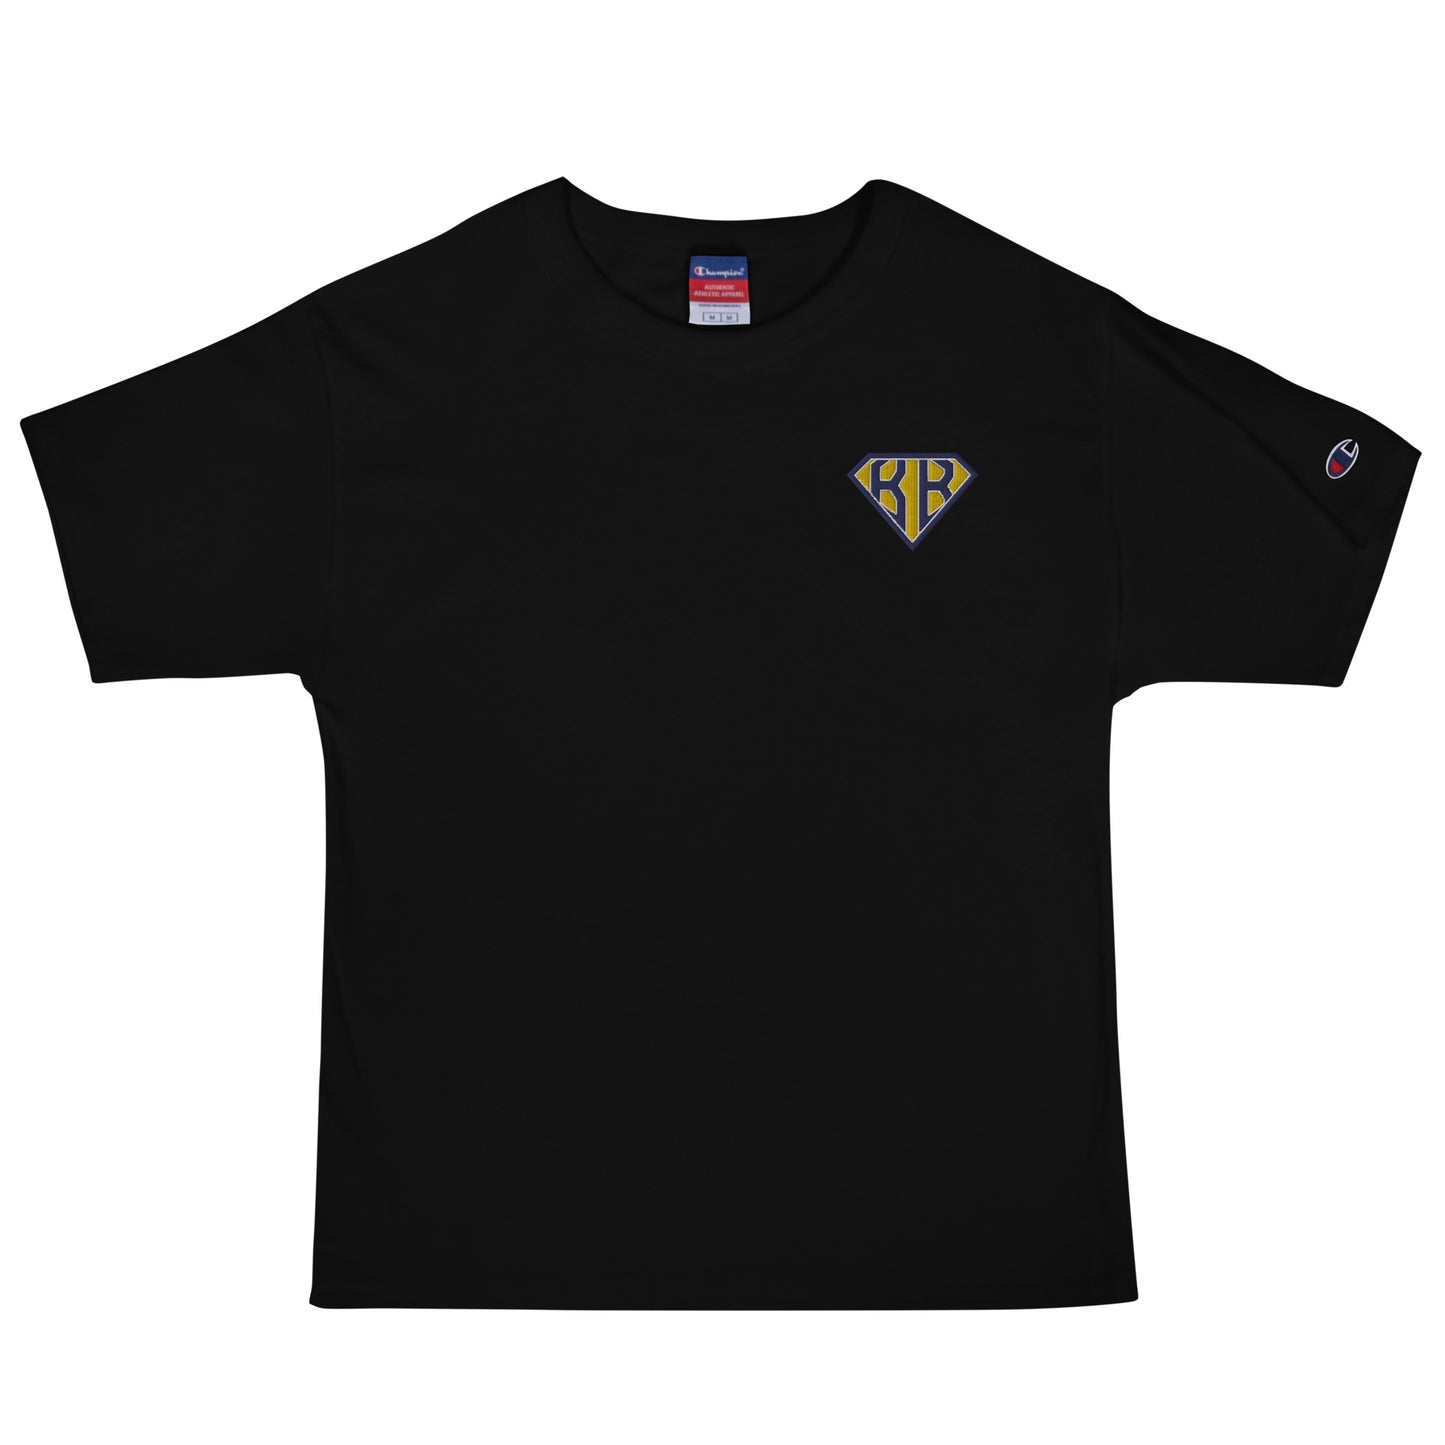 BB Embroidered Men's Champion T-Shirt